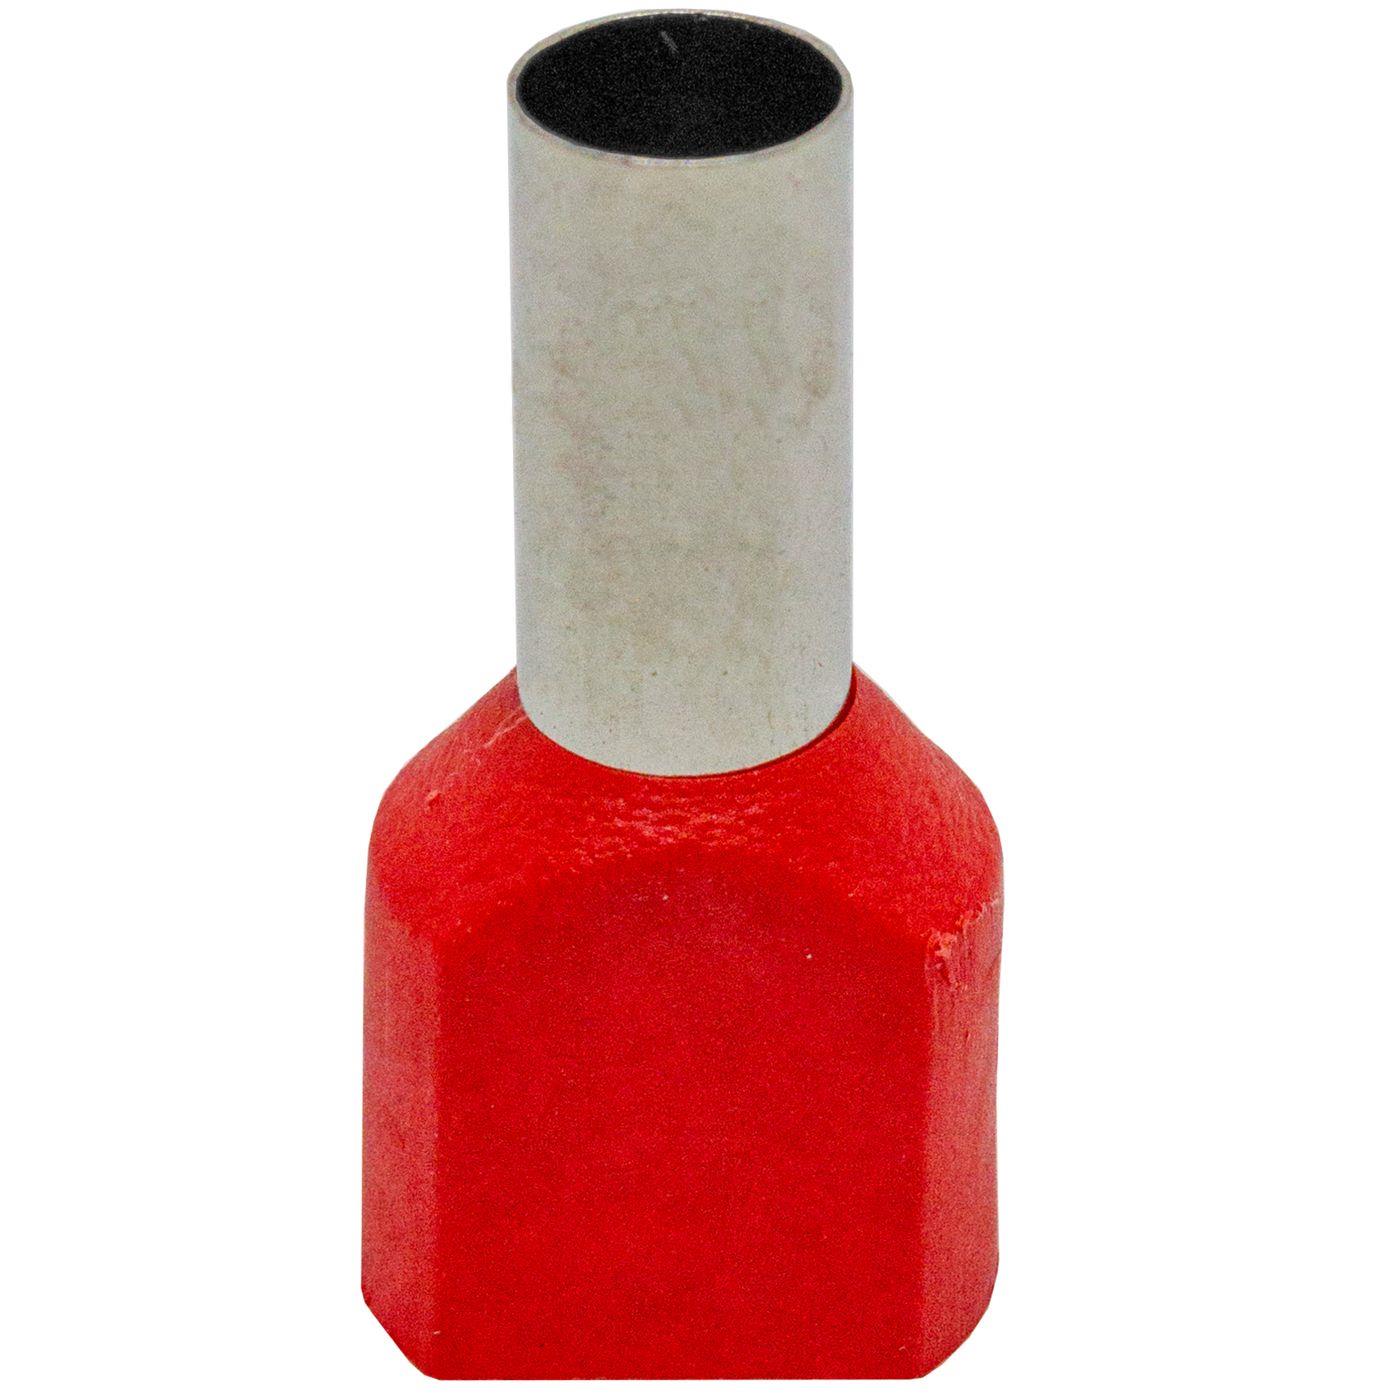 100x Twin wire end ferrule isolated 2x 10mm² Red Copper tinned 6,8x14mm Sleeve